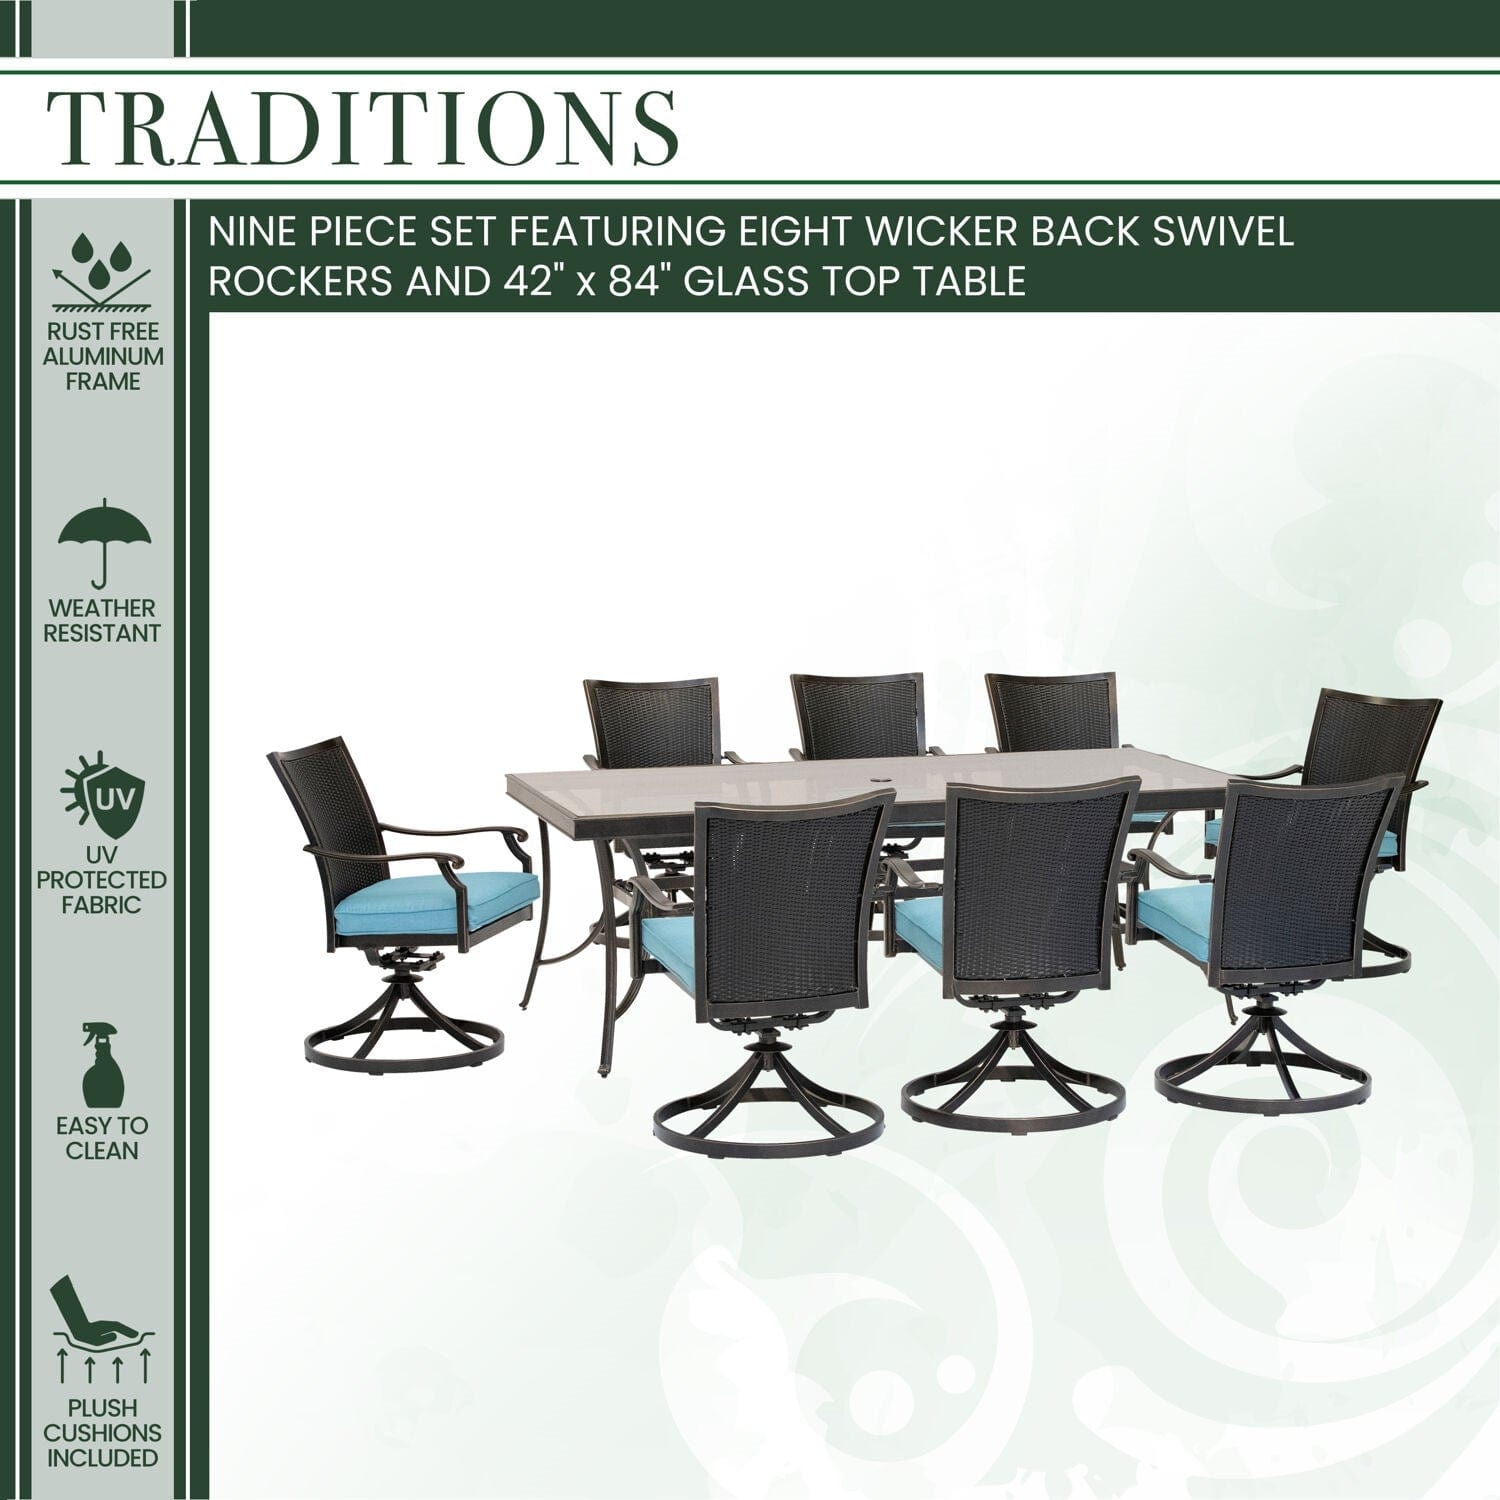 Hanover Outdoor Dining Set Hanover - Traditions 9-Piece Dining Set in Blue with 8 Wicker Back Swivel Rockers and Extra Large 42 in. x 84 in. Glass-Top Table - TRADDNWB9PCSWG-BLU